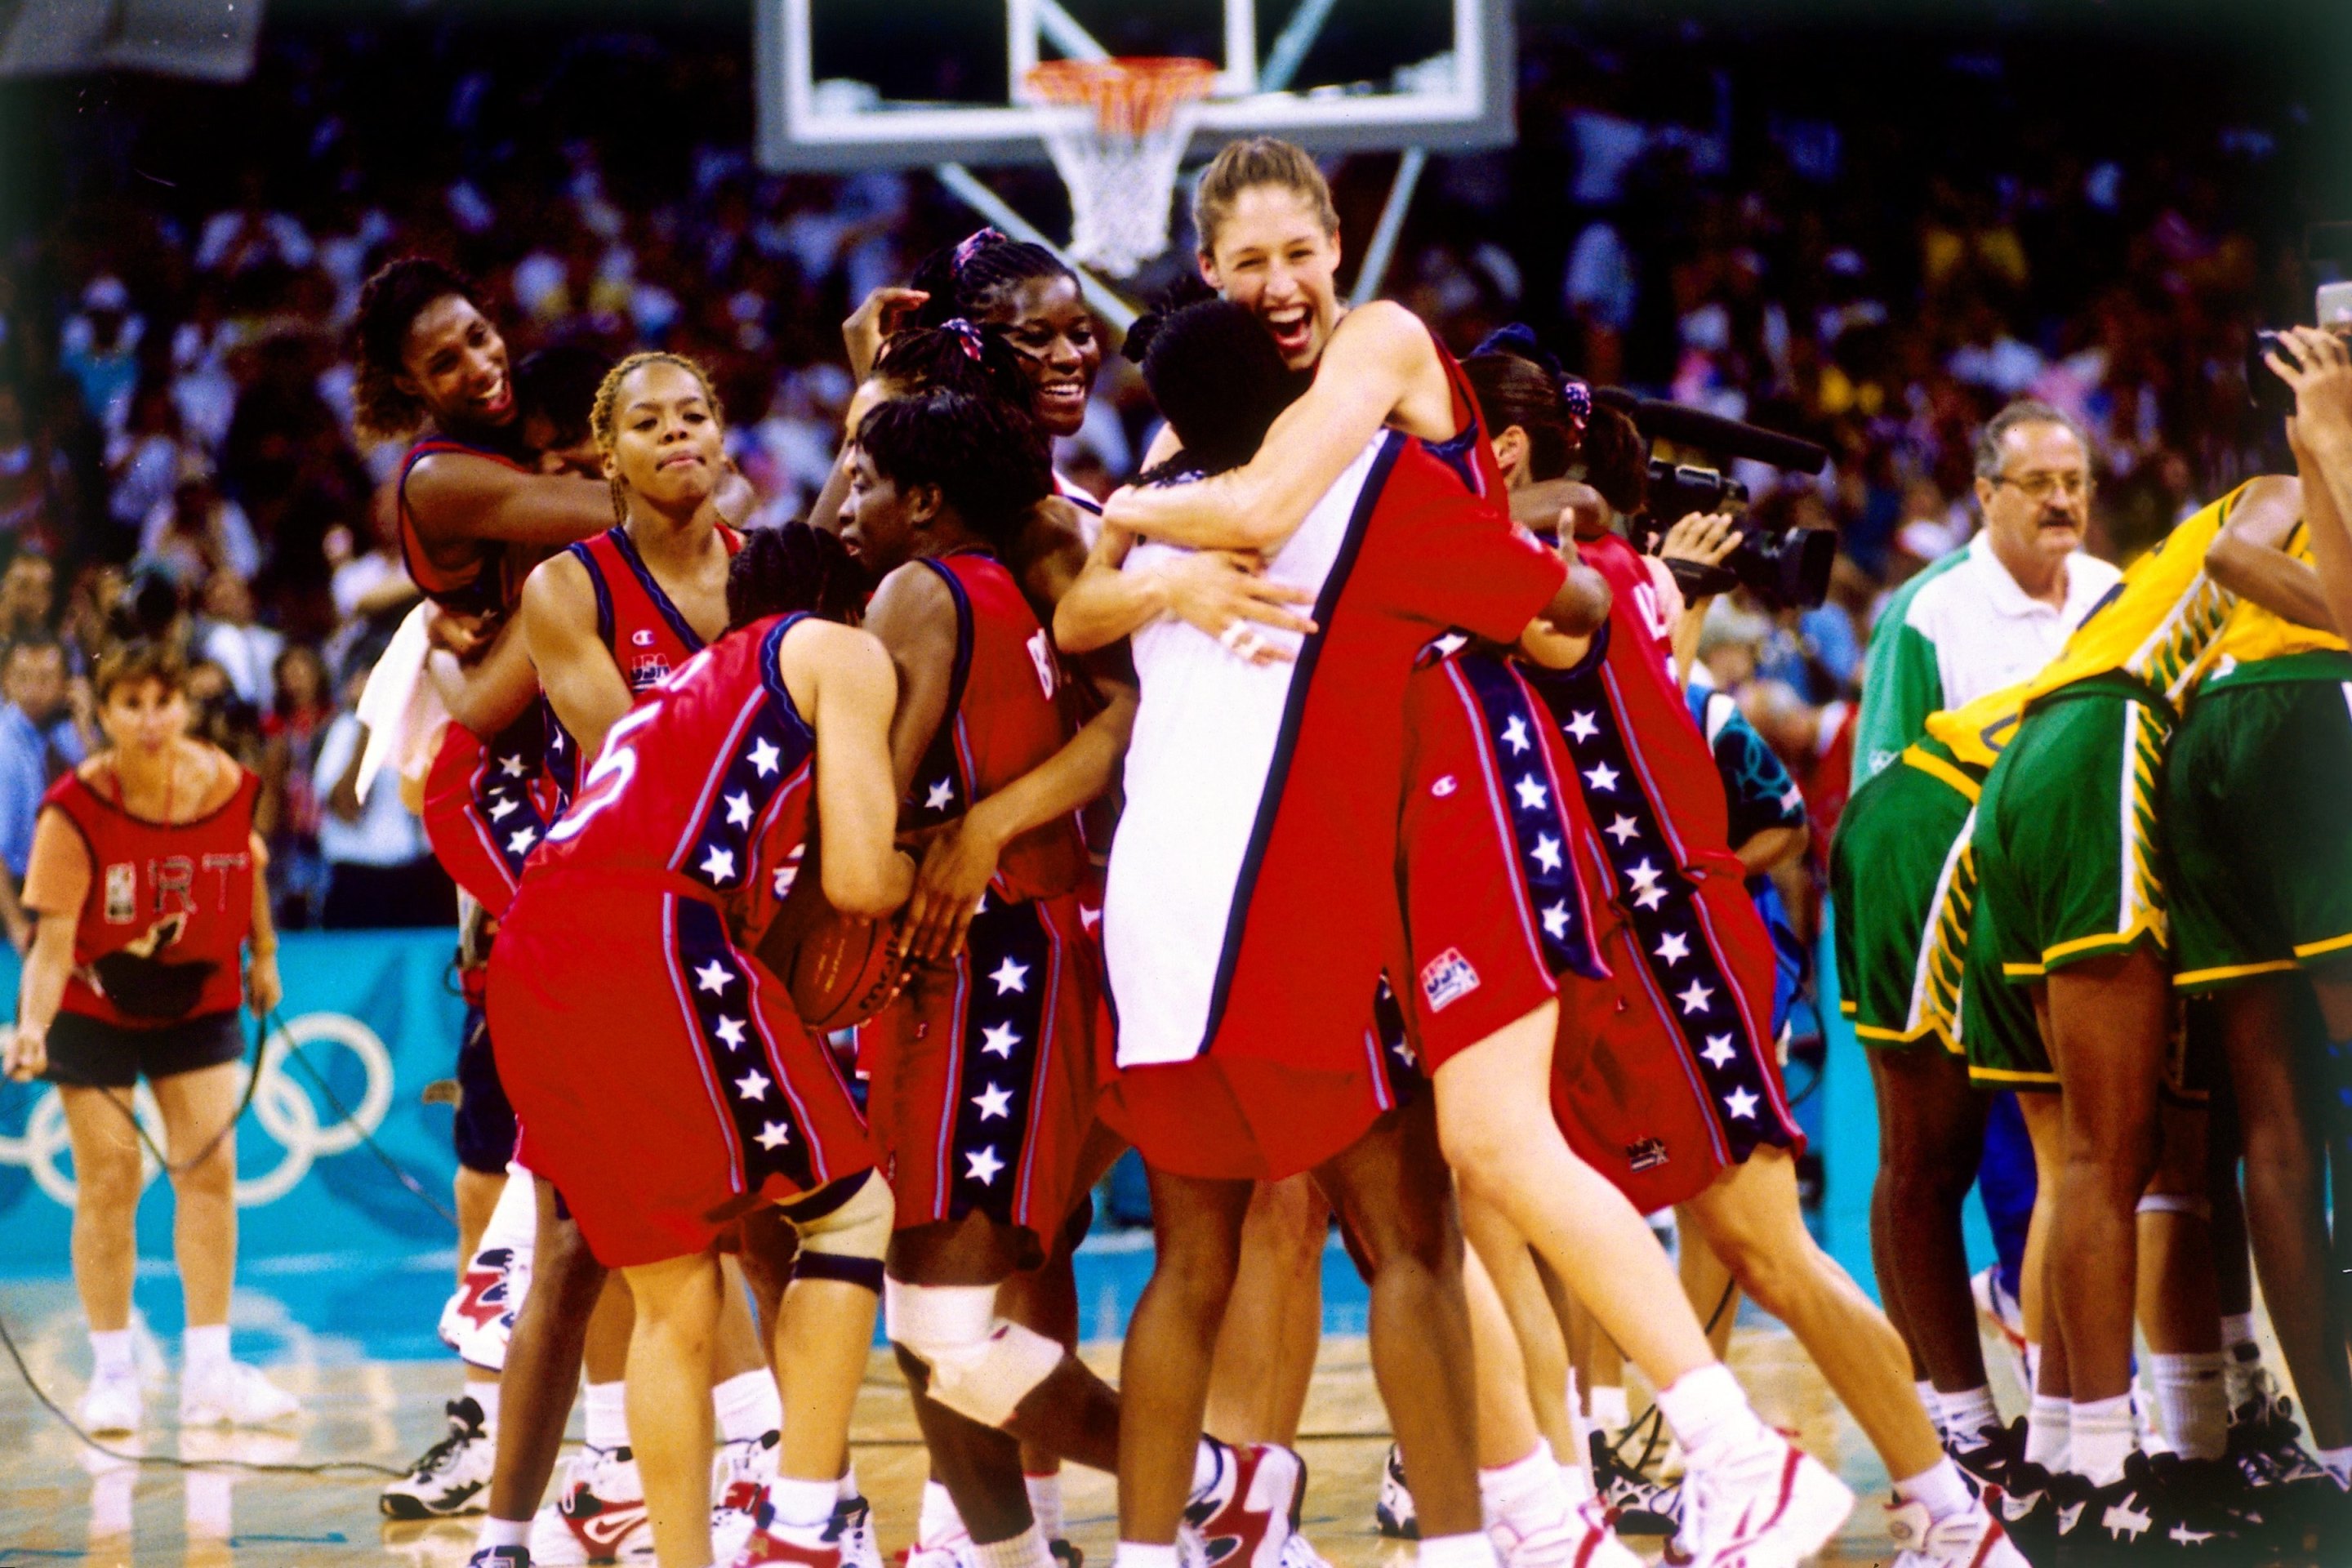 The United States Women's National team celebrate their victory during the 1996 Olympic Games in Atlanta, Georgia.